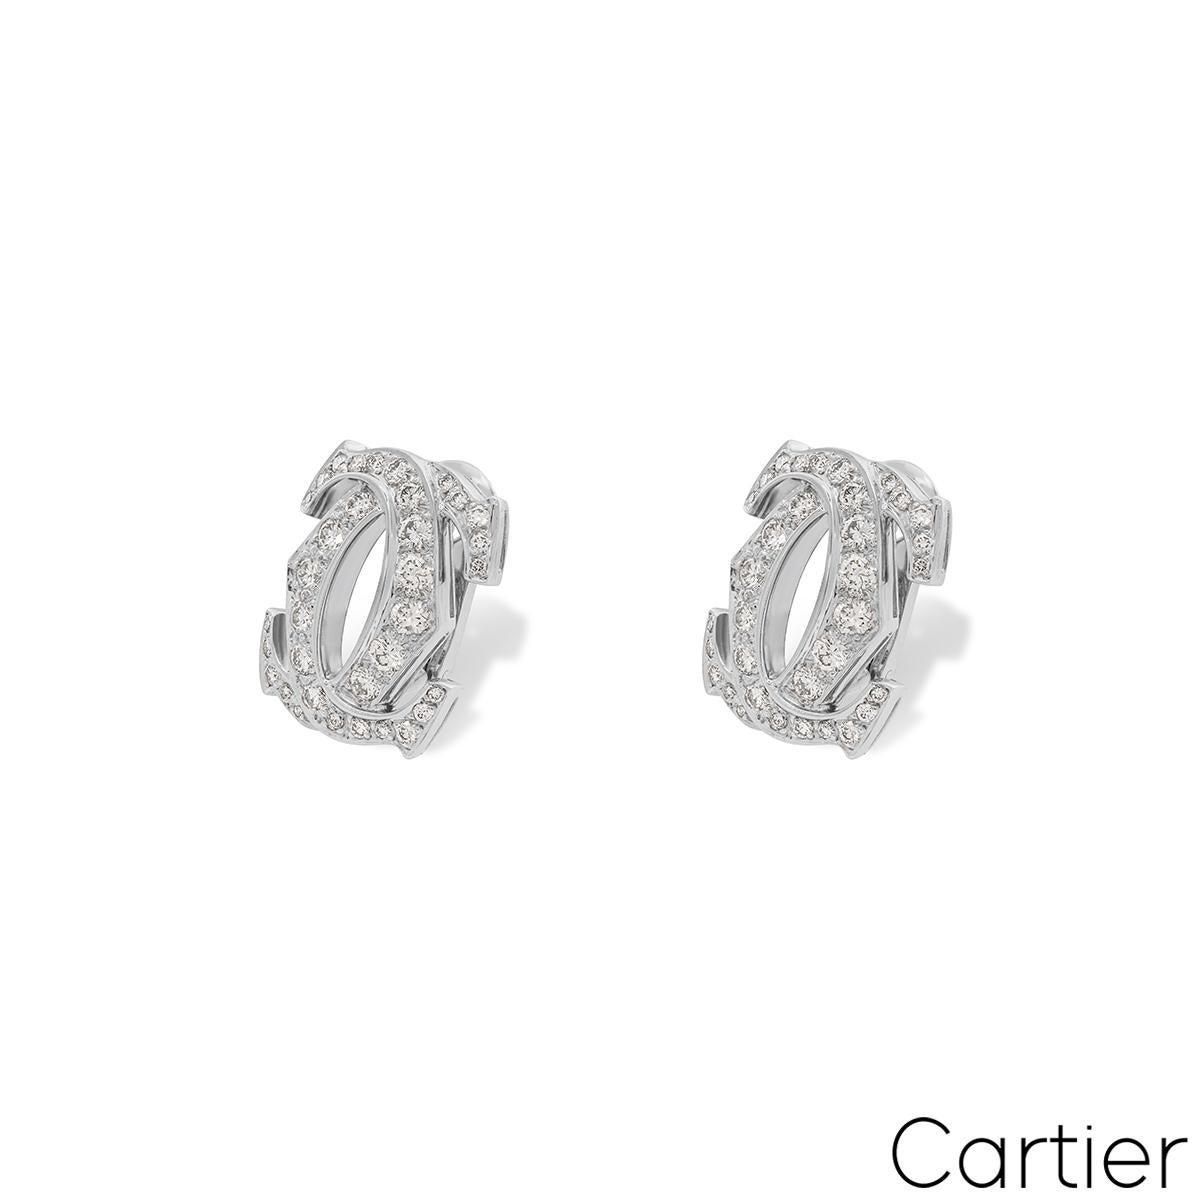 A stunning pair of 18k white gold diamond earrings by Cartier from the Penelope collection. Each of the earrings comprise of the iconic double c motif pave set with 34 round brilliant cut diamonds. The 68 diamonds have an approximate total weight of